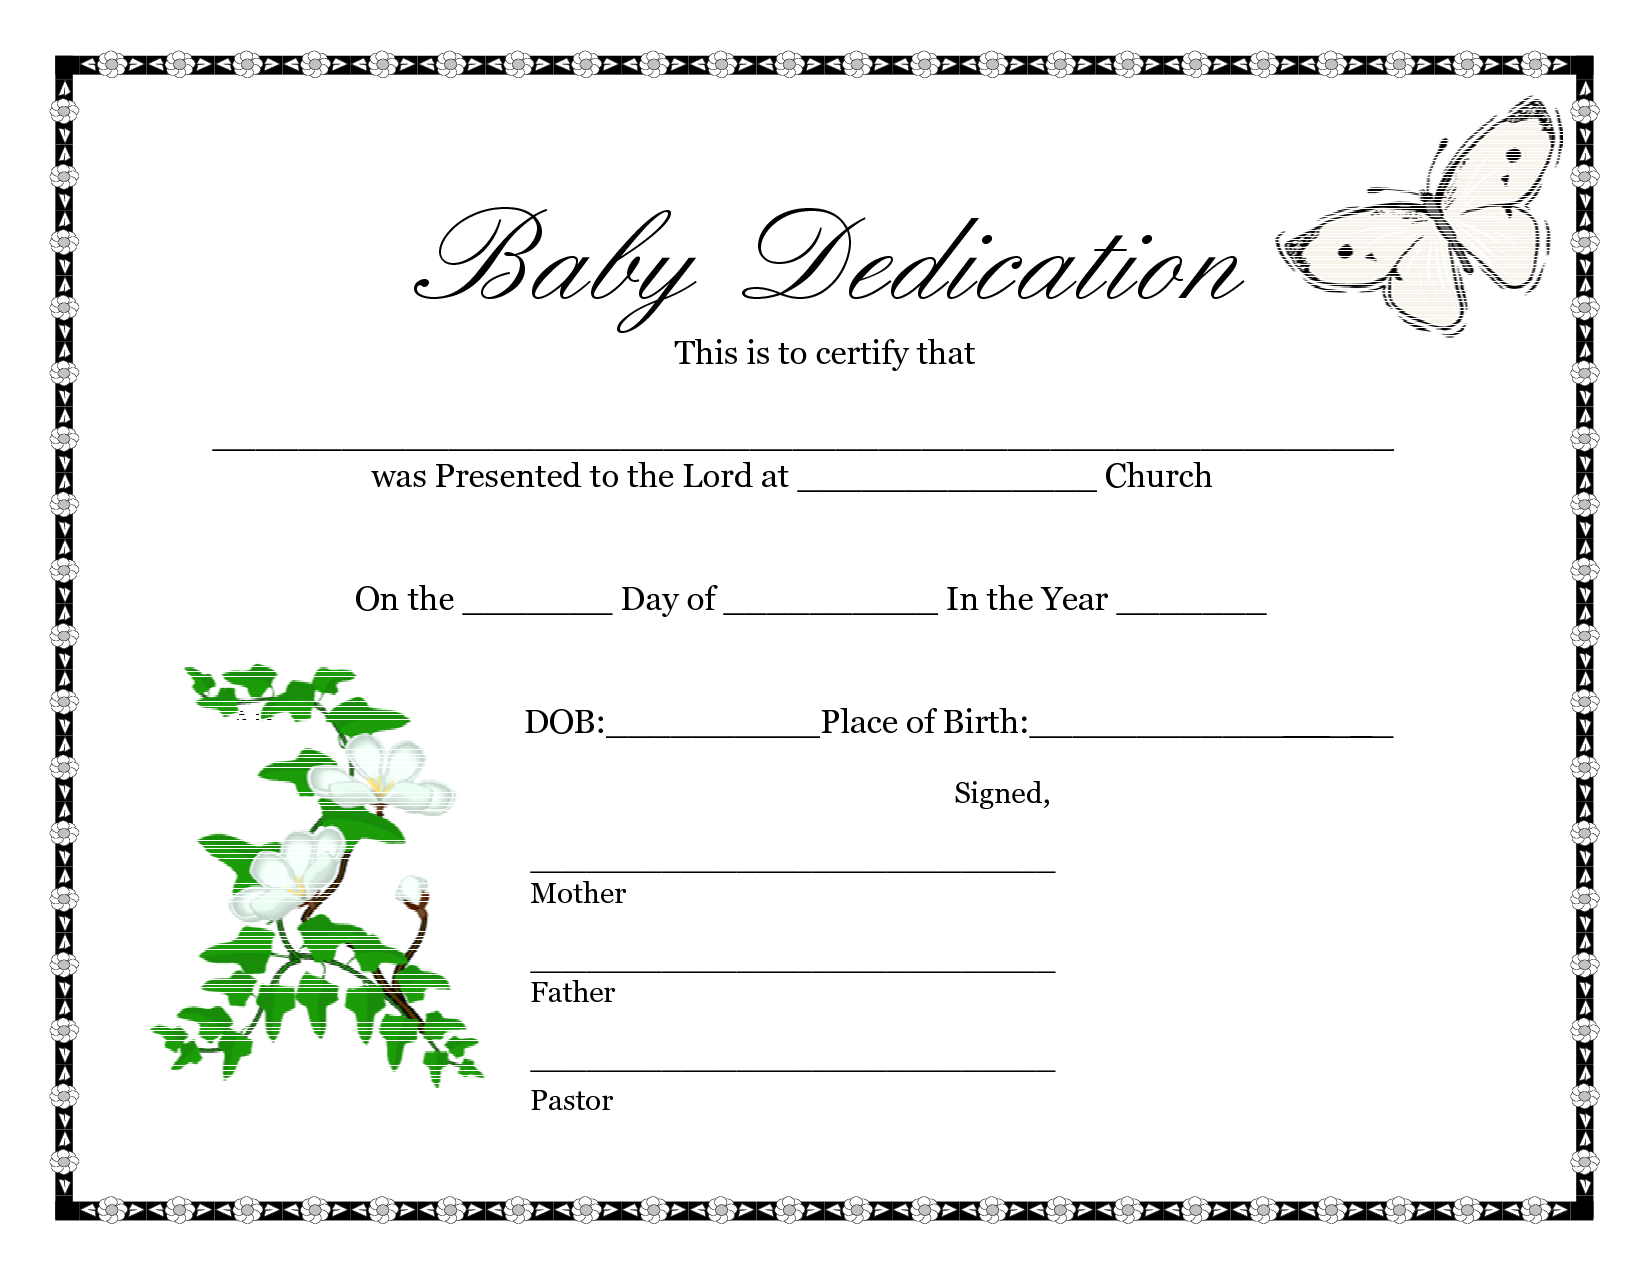 Downloadable Blank Birth Certificate Template Sample : V M D In Fake Birth Certificate Template